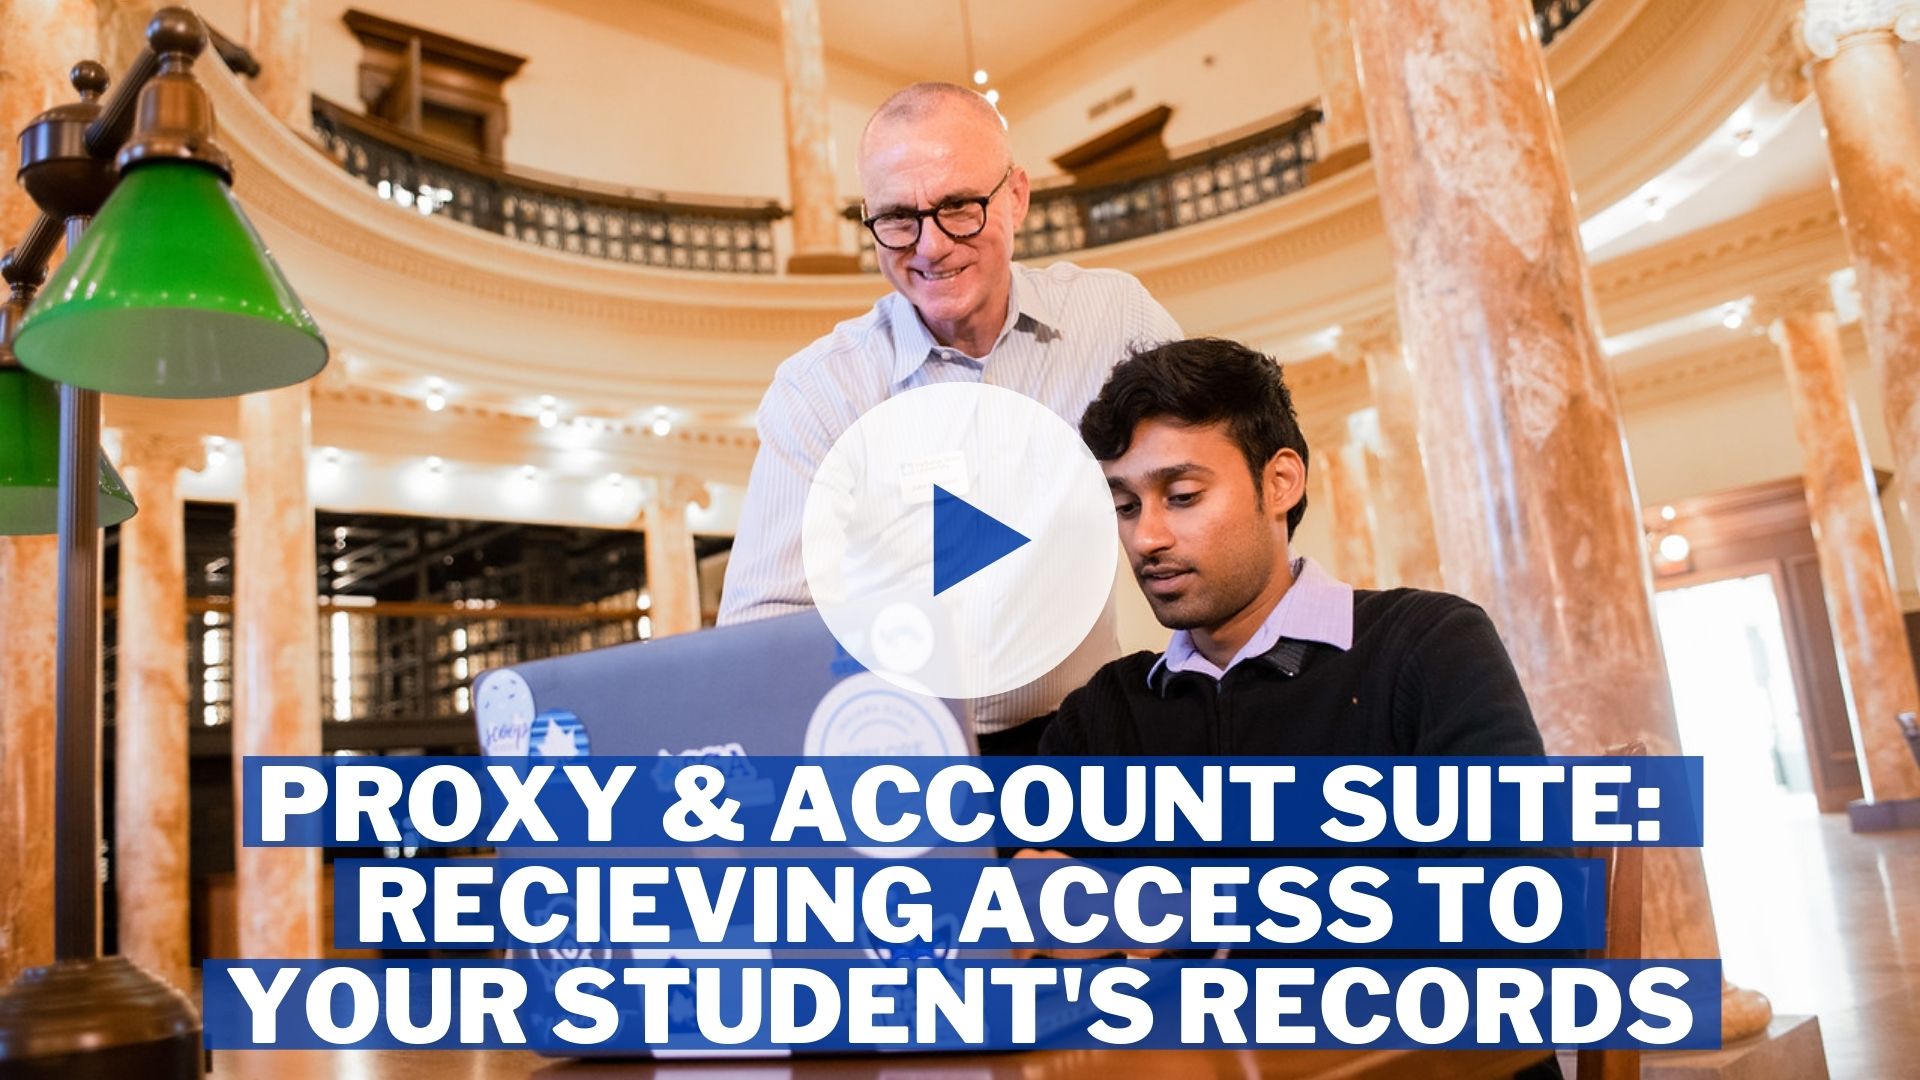 Proxy &amp; Account Suite - Receiving Access to Your Student's Records